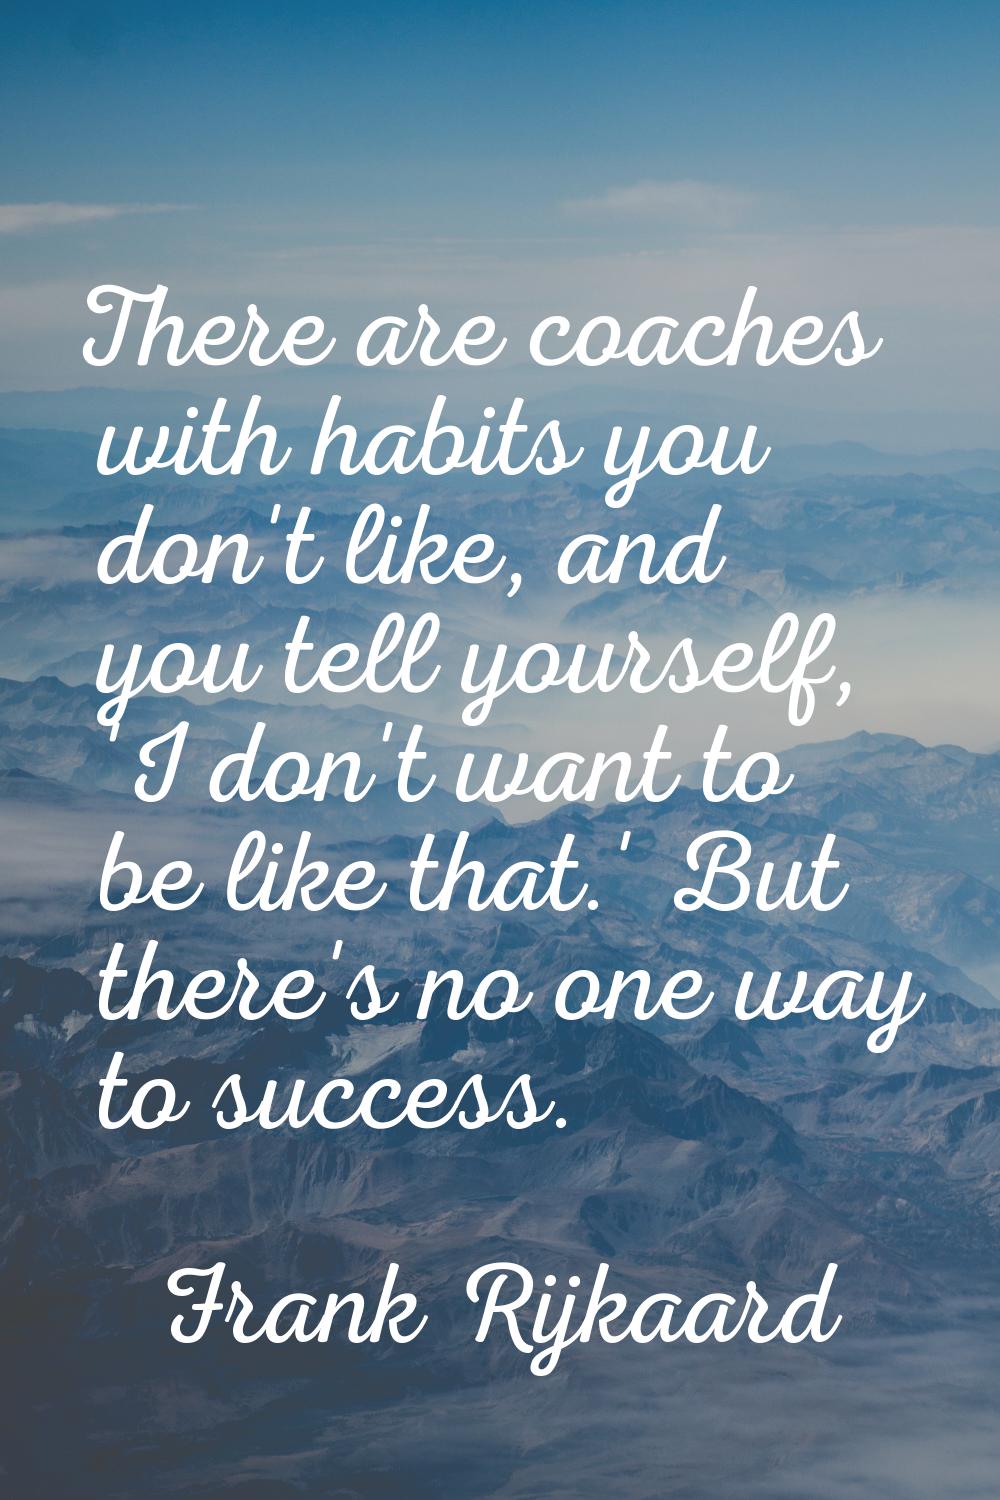 There are coaches with habits you don't like, and you tell yourself, 'I don't want to be like that.